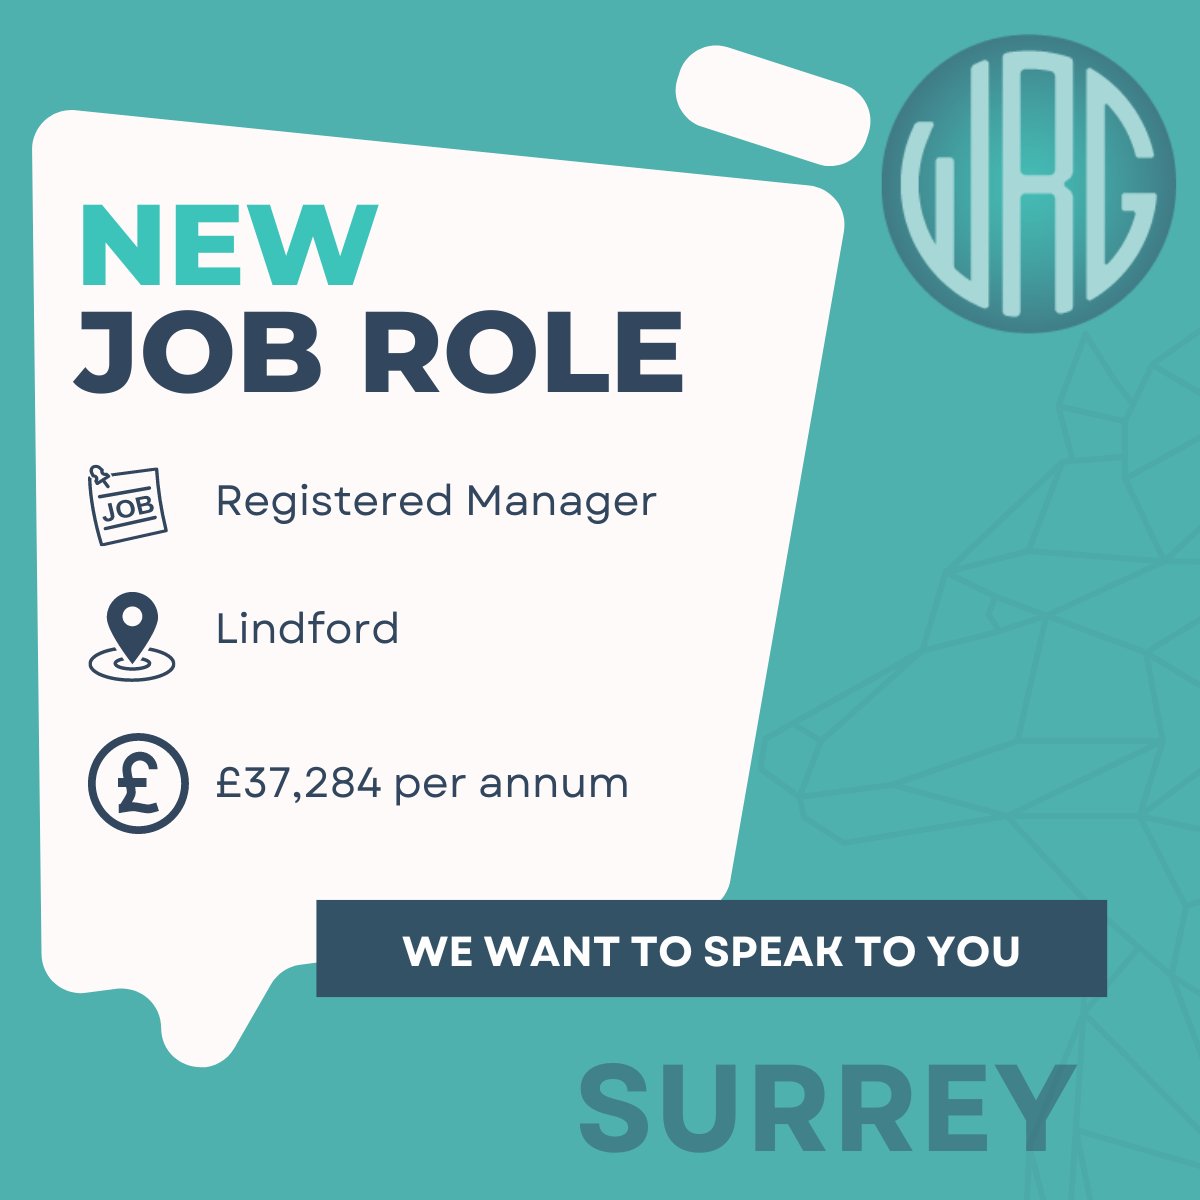 ⭐️Registered Manager
📍Lindford
💰£37,284 per annum
✔️Full-time permanent contract

Click here to apply now! adr.to/ffht2ai

#SurreyJobs #LindfordJobs #RegisteredManager #UKHealthandsocialcare #adultsocialcare #makeadifference #wolfcare #wolfjobs